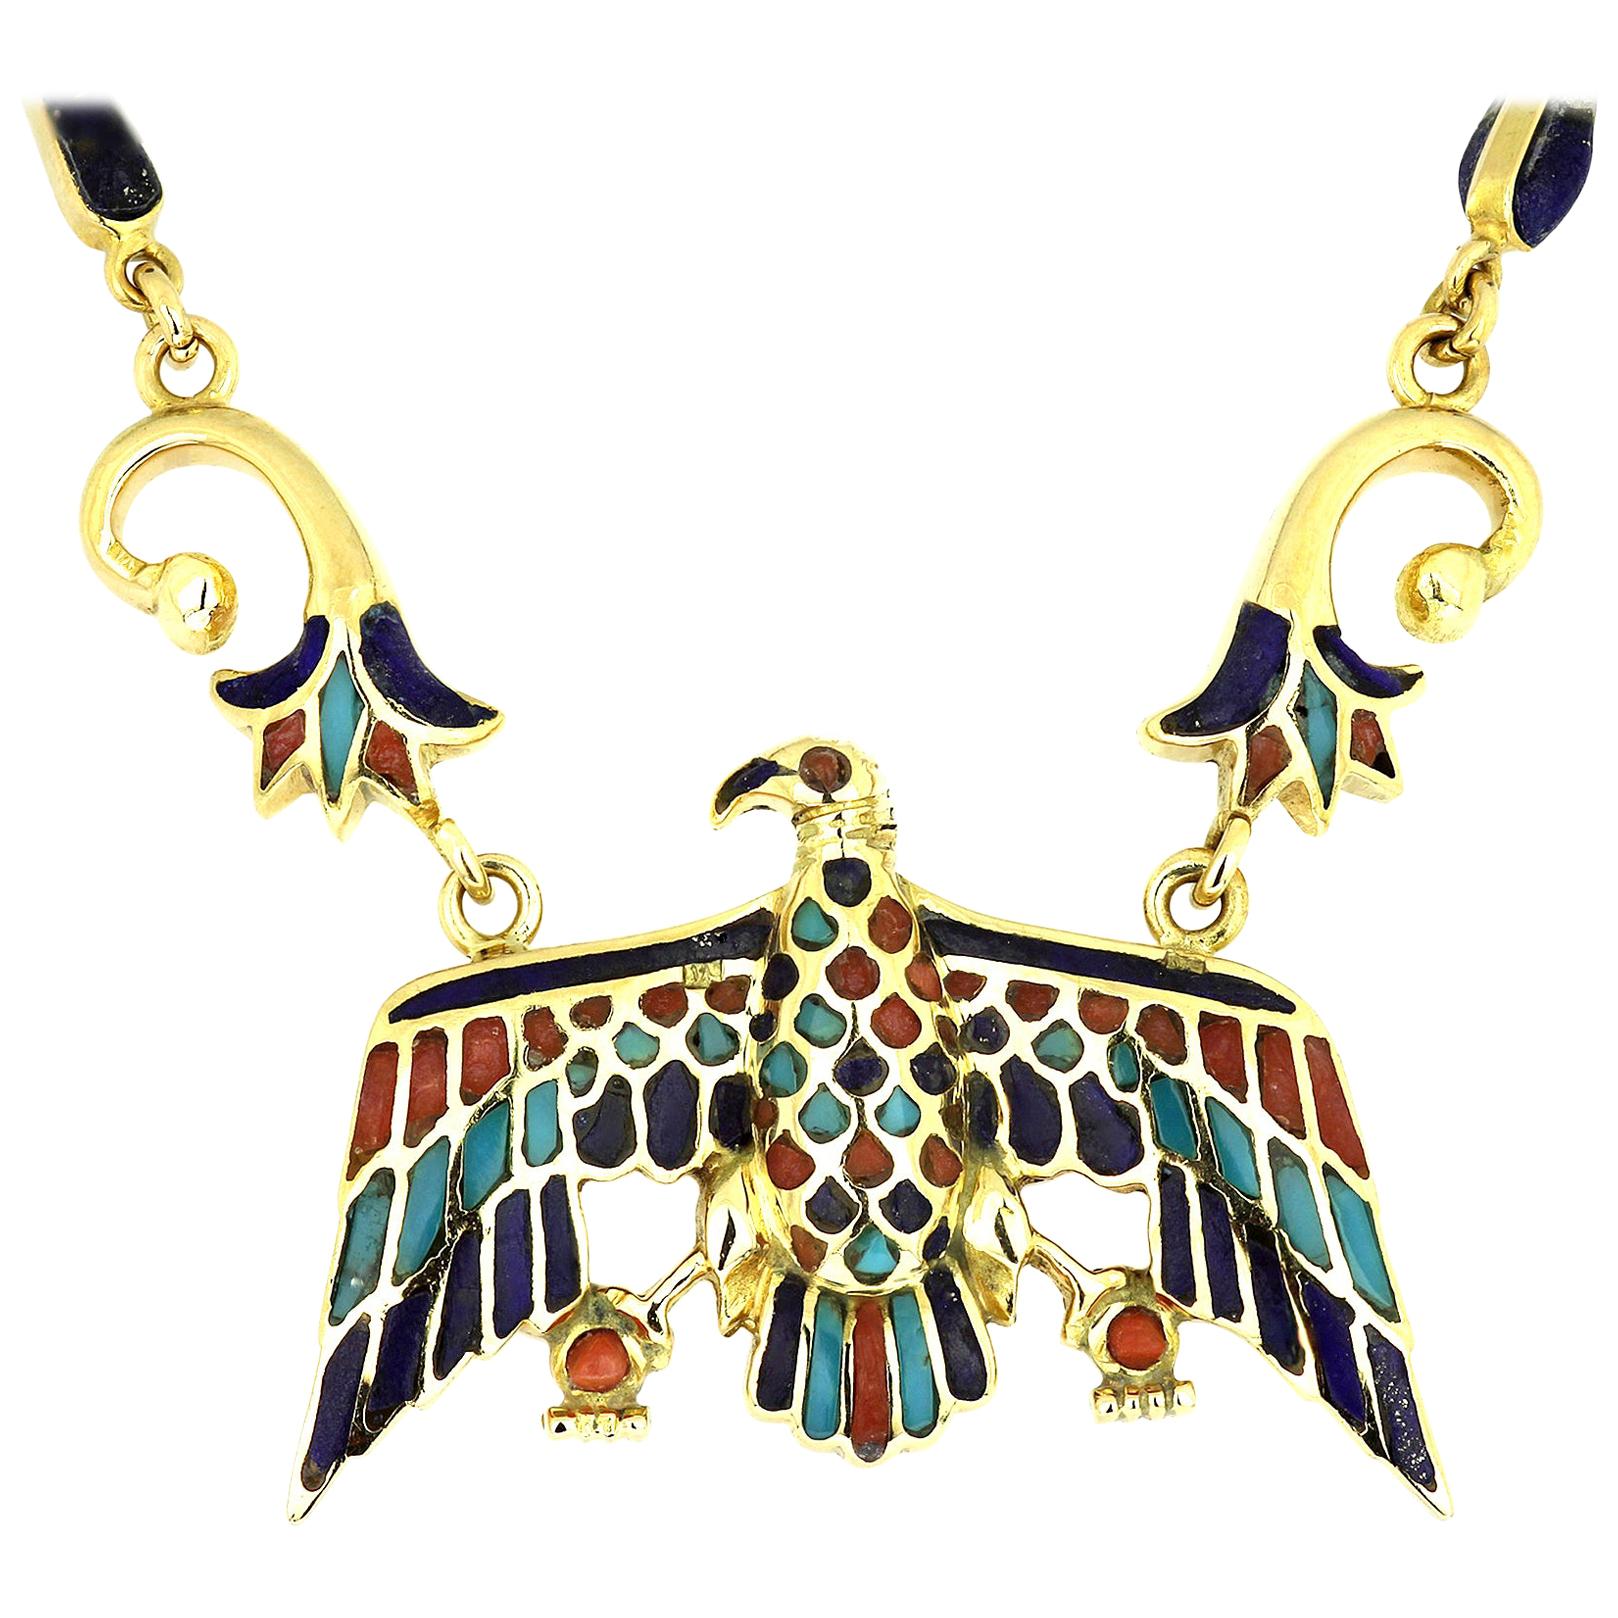 Eagle Necklace in 18 Carat Gold, Coral, Lapis Lazuli, and Turquoise Mosaics